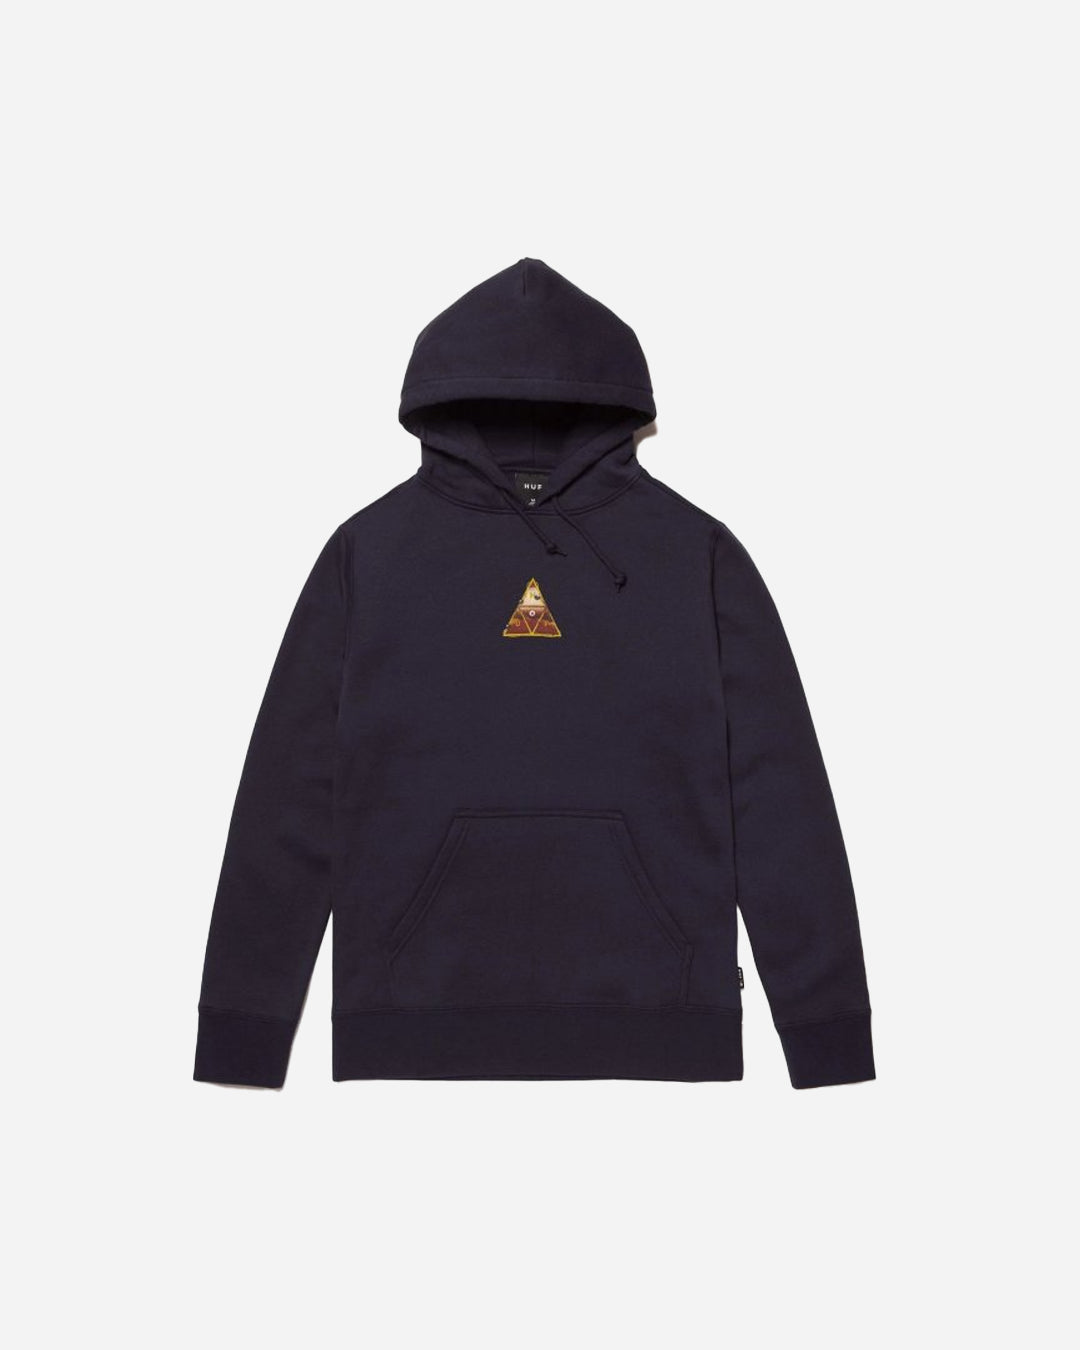 ALTERED STATED TT P/O HOODIE